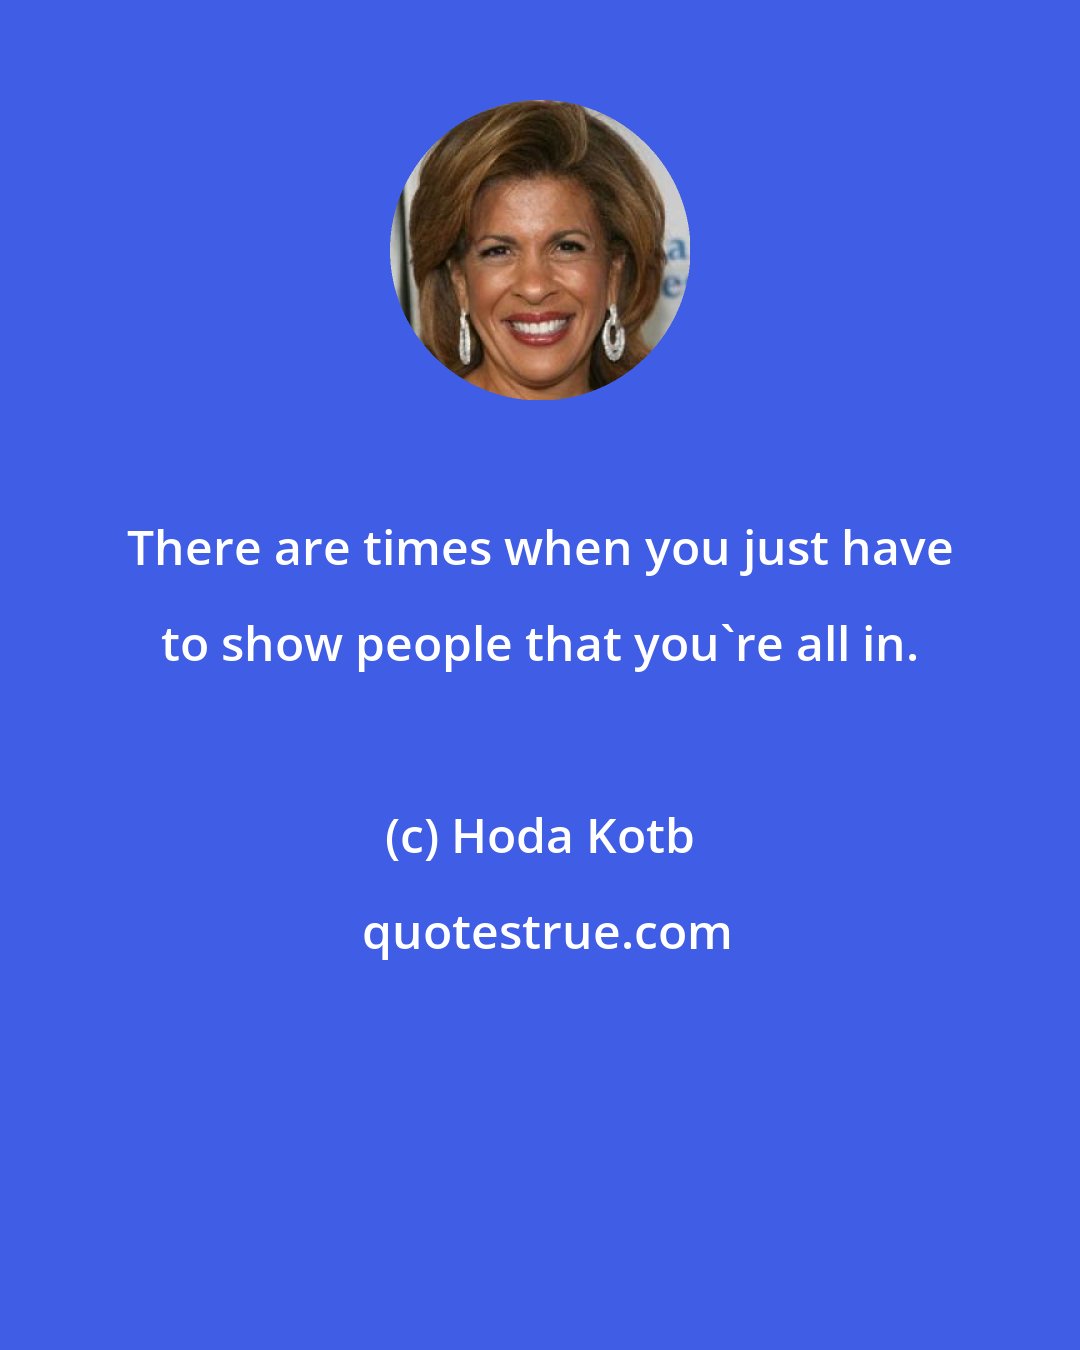 Hoda Kotb: There are times when you just have to show people that you're all in.